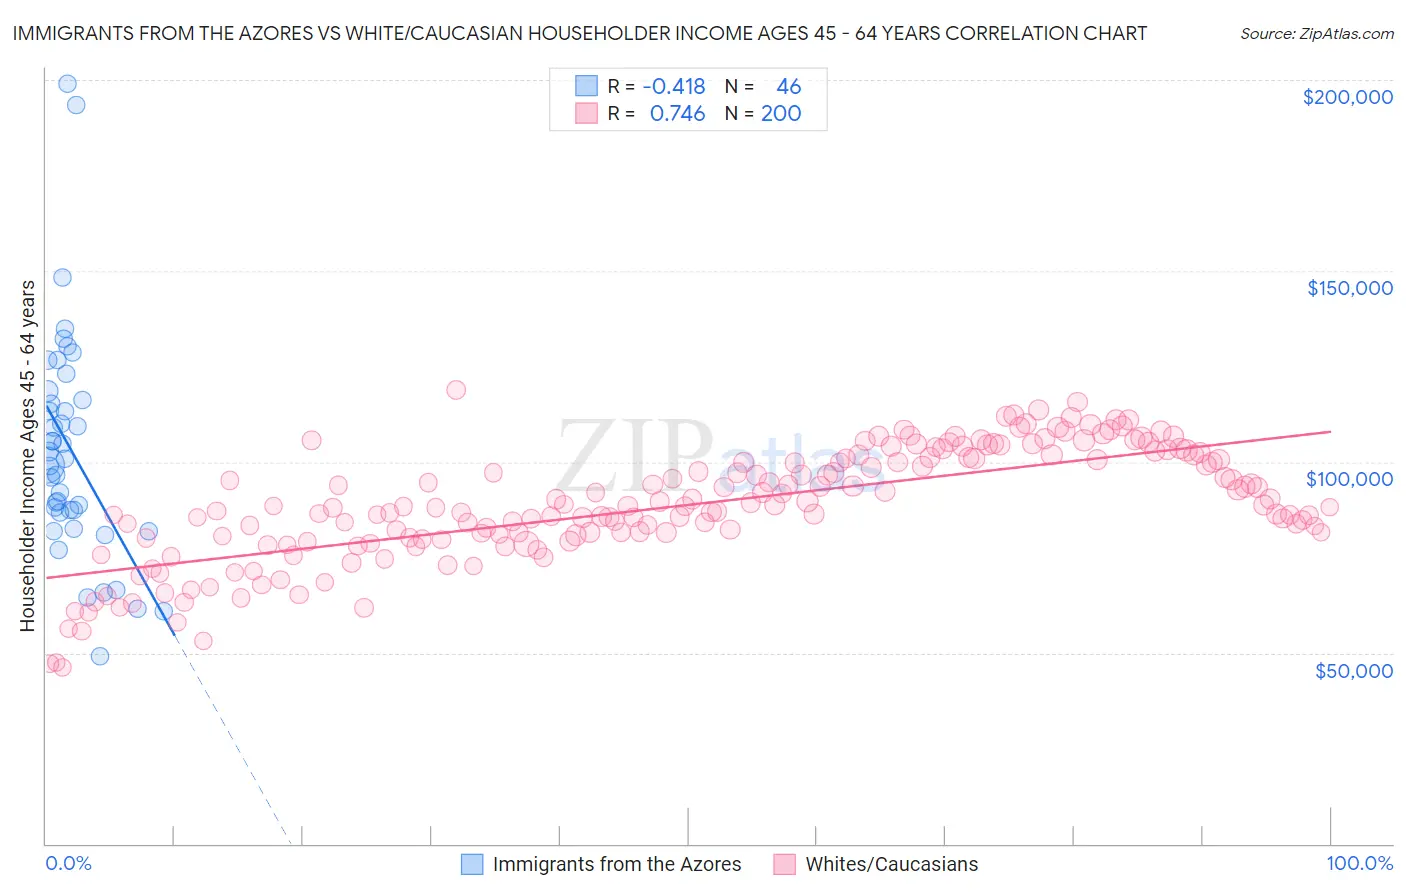 Immigrants from the Azores vs White/Caucasian Householder Income Ages 45 - 64 years